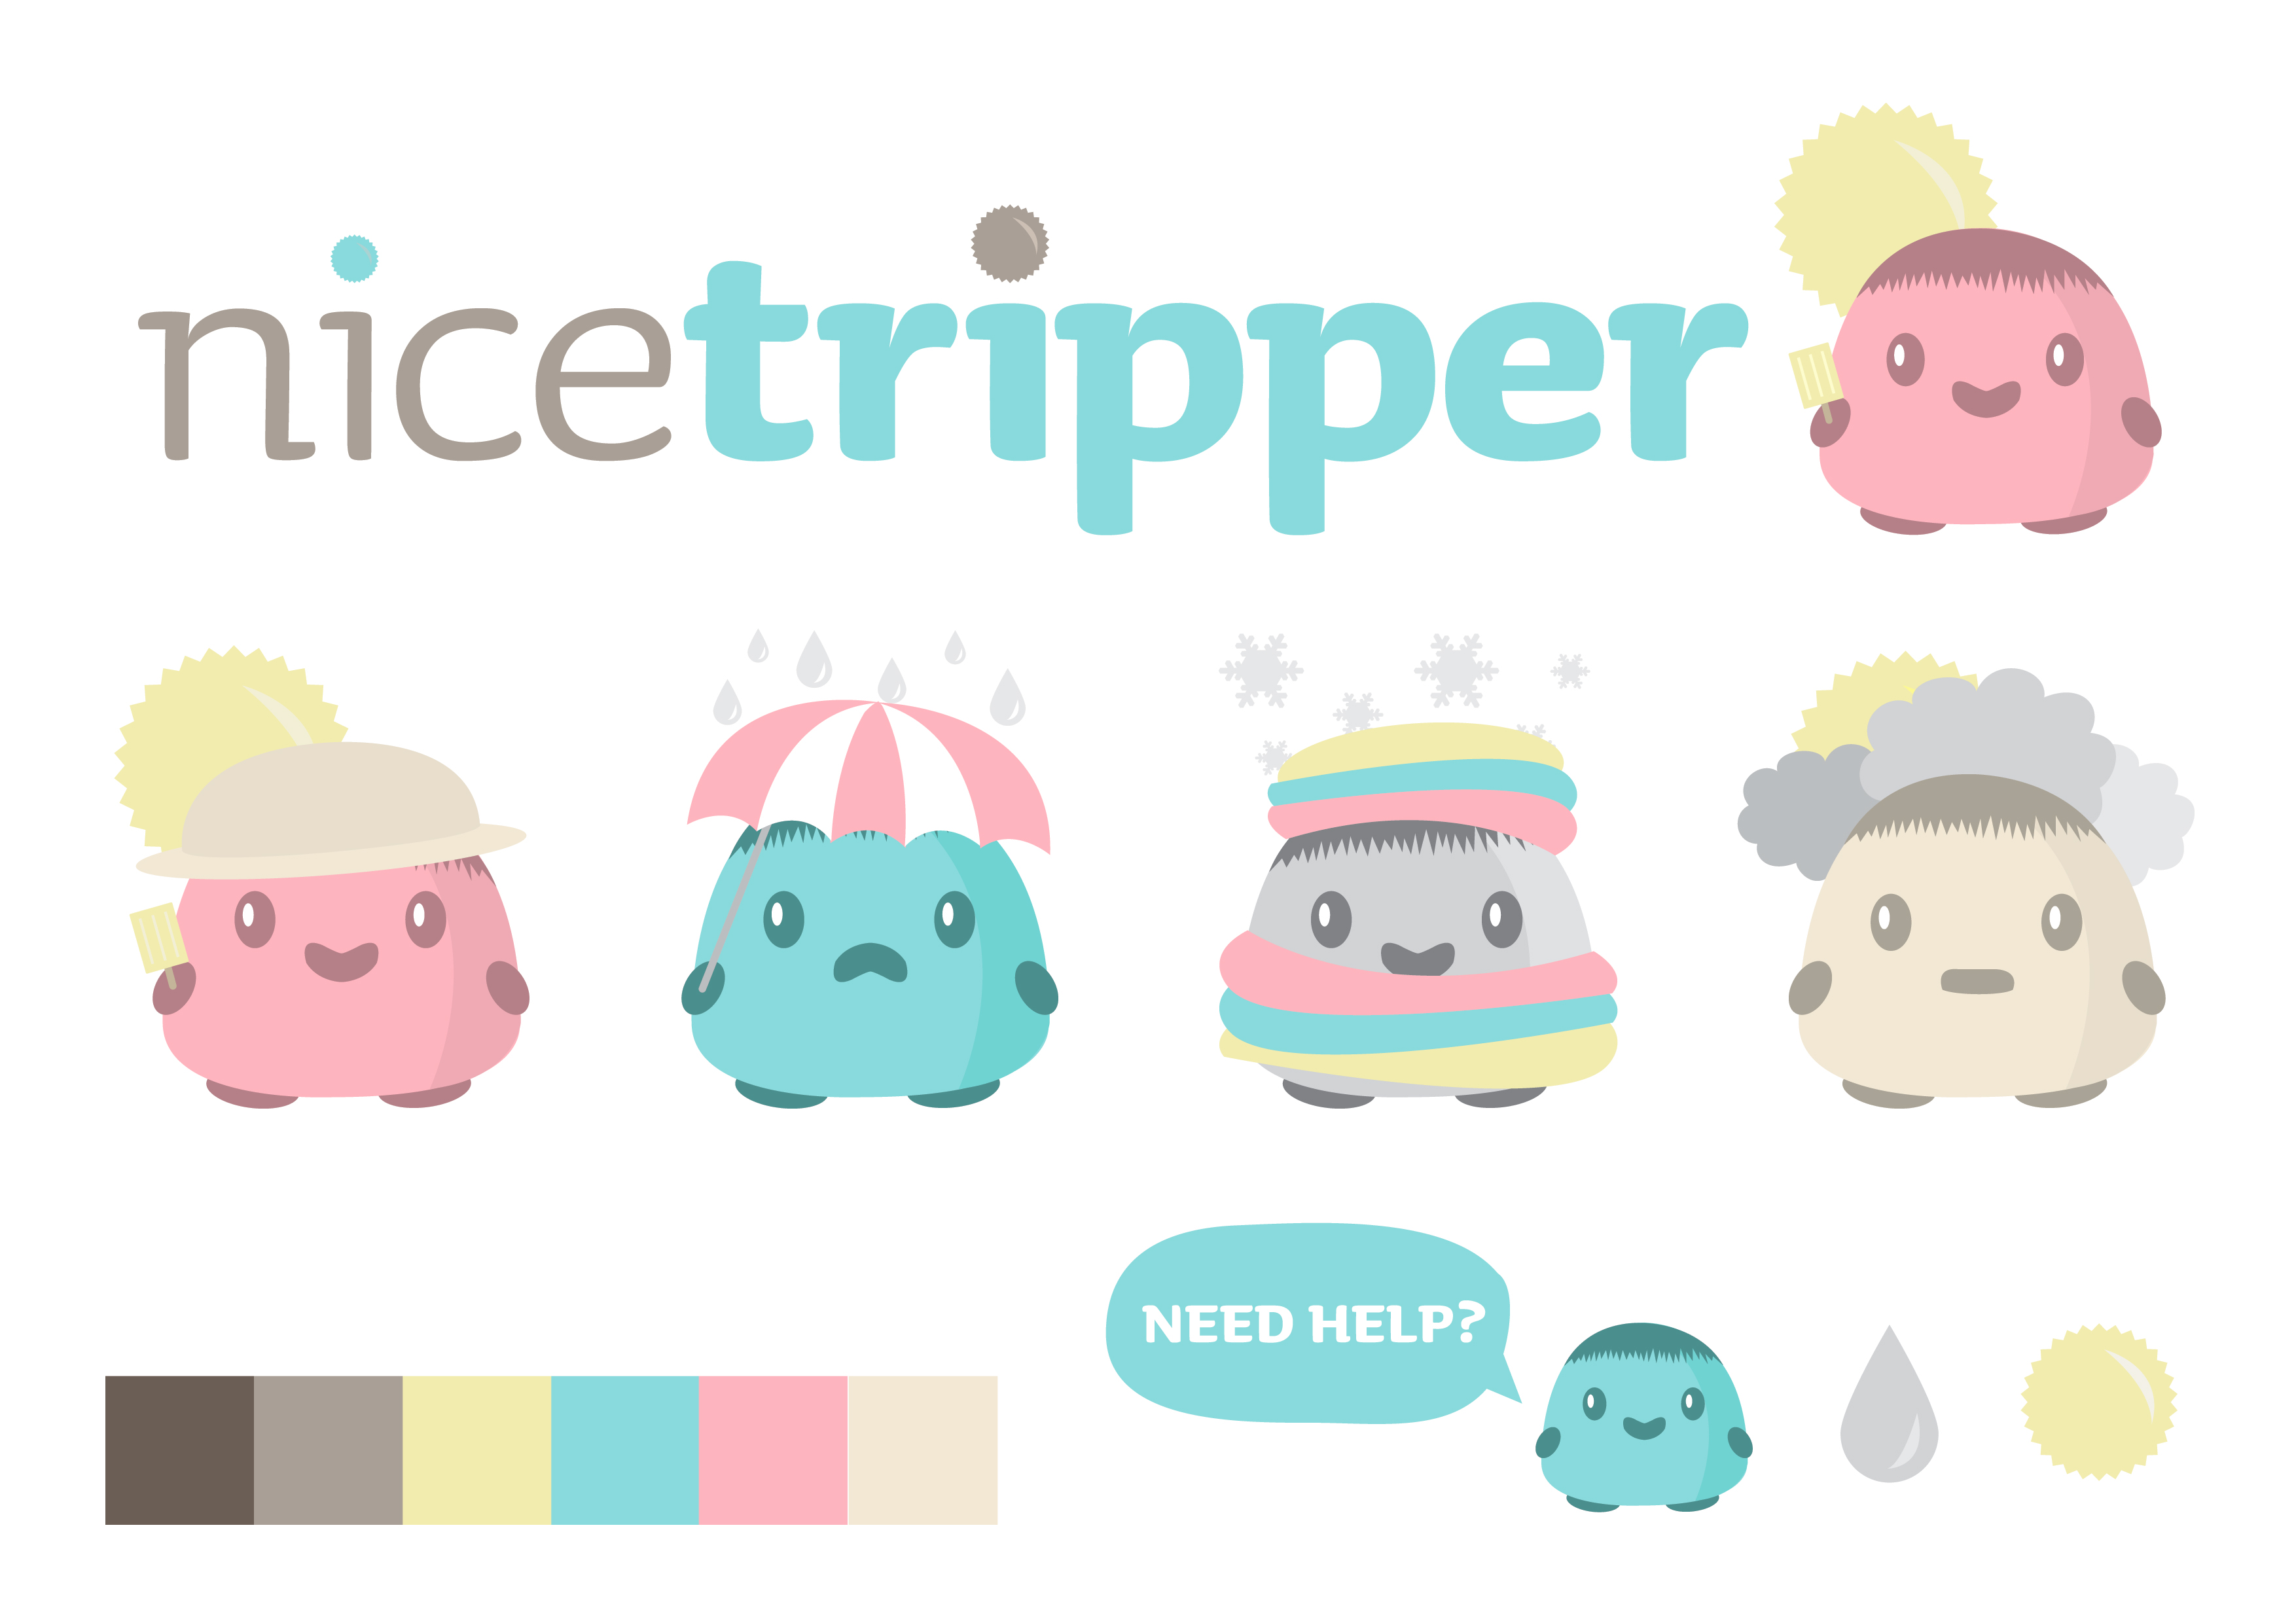 Nice tripper logo and iconography designs